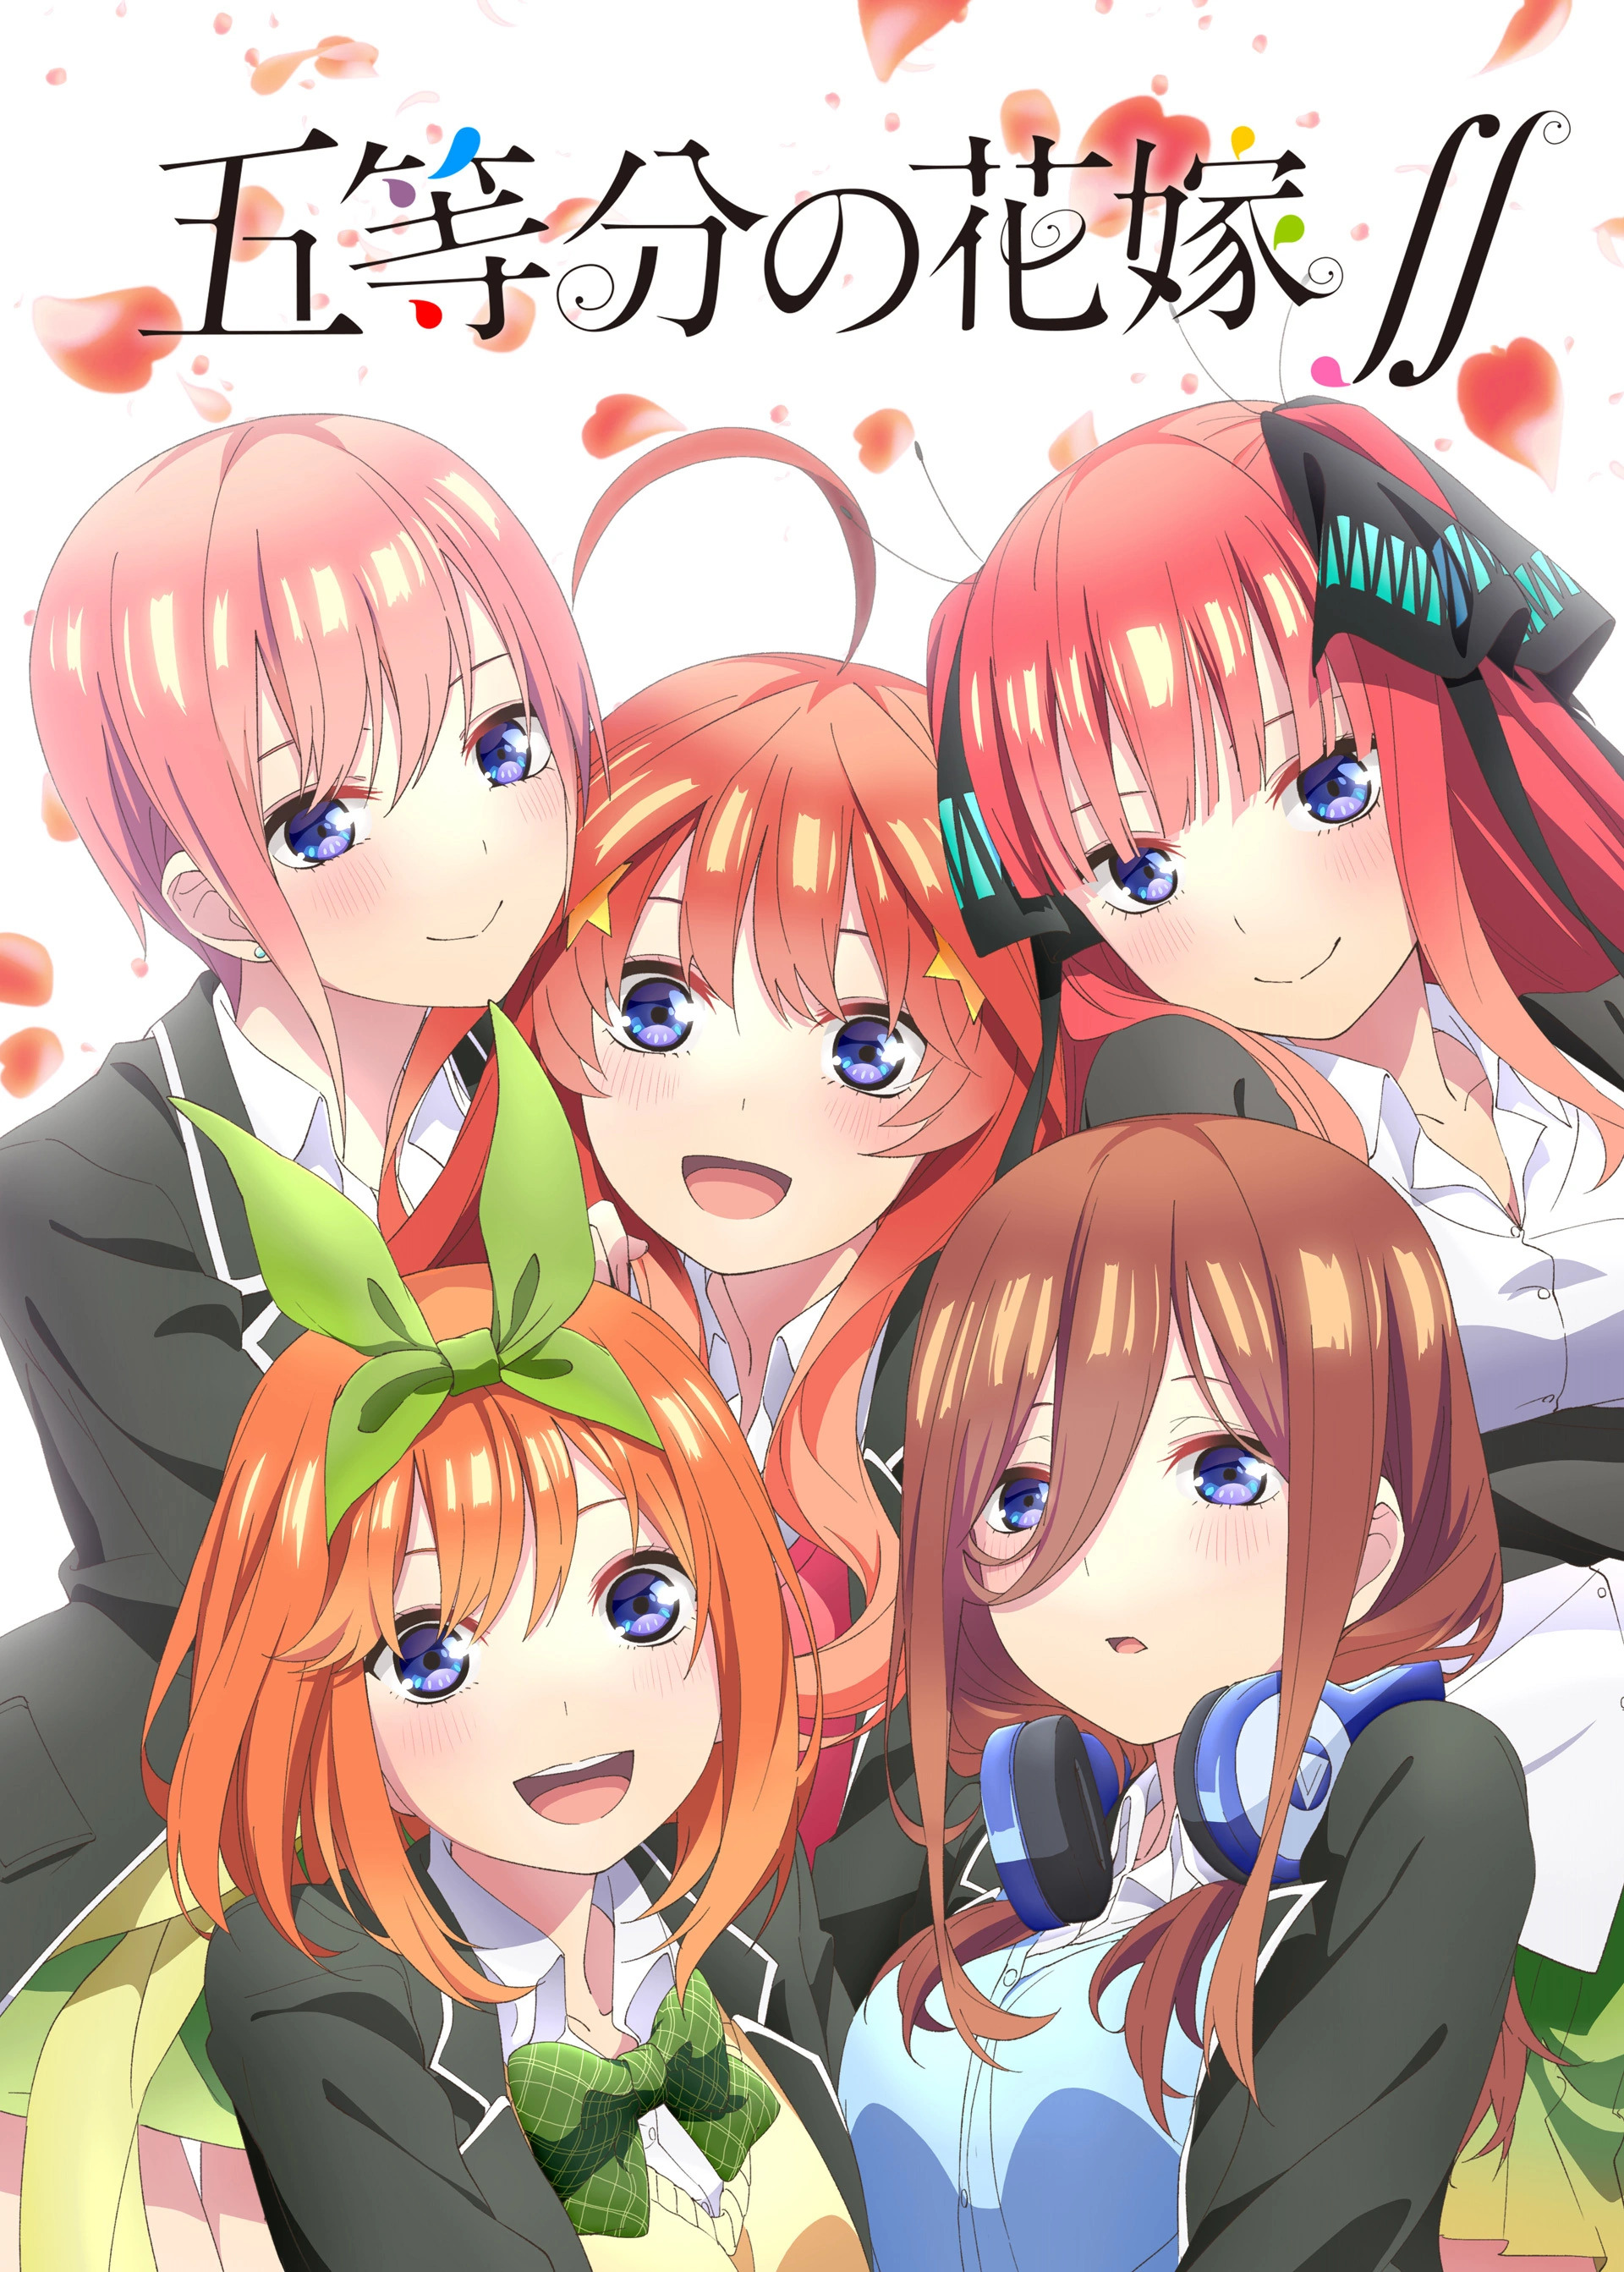 The Quintessential Quintuplets   Anime VoiceOver Wiki  Fandom